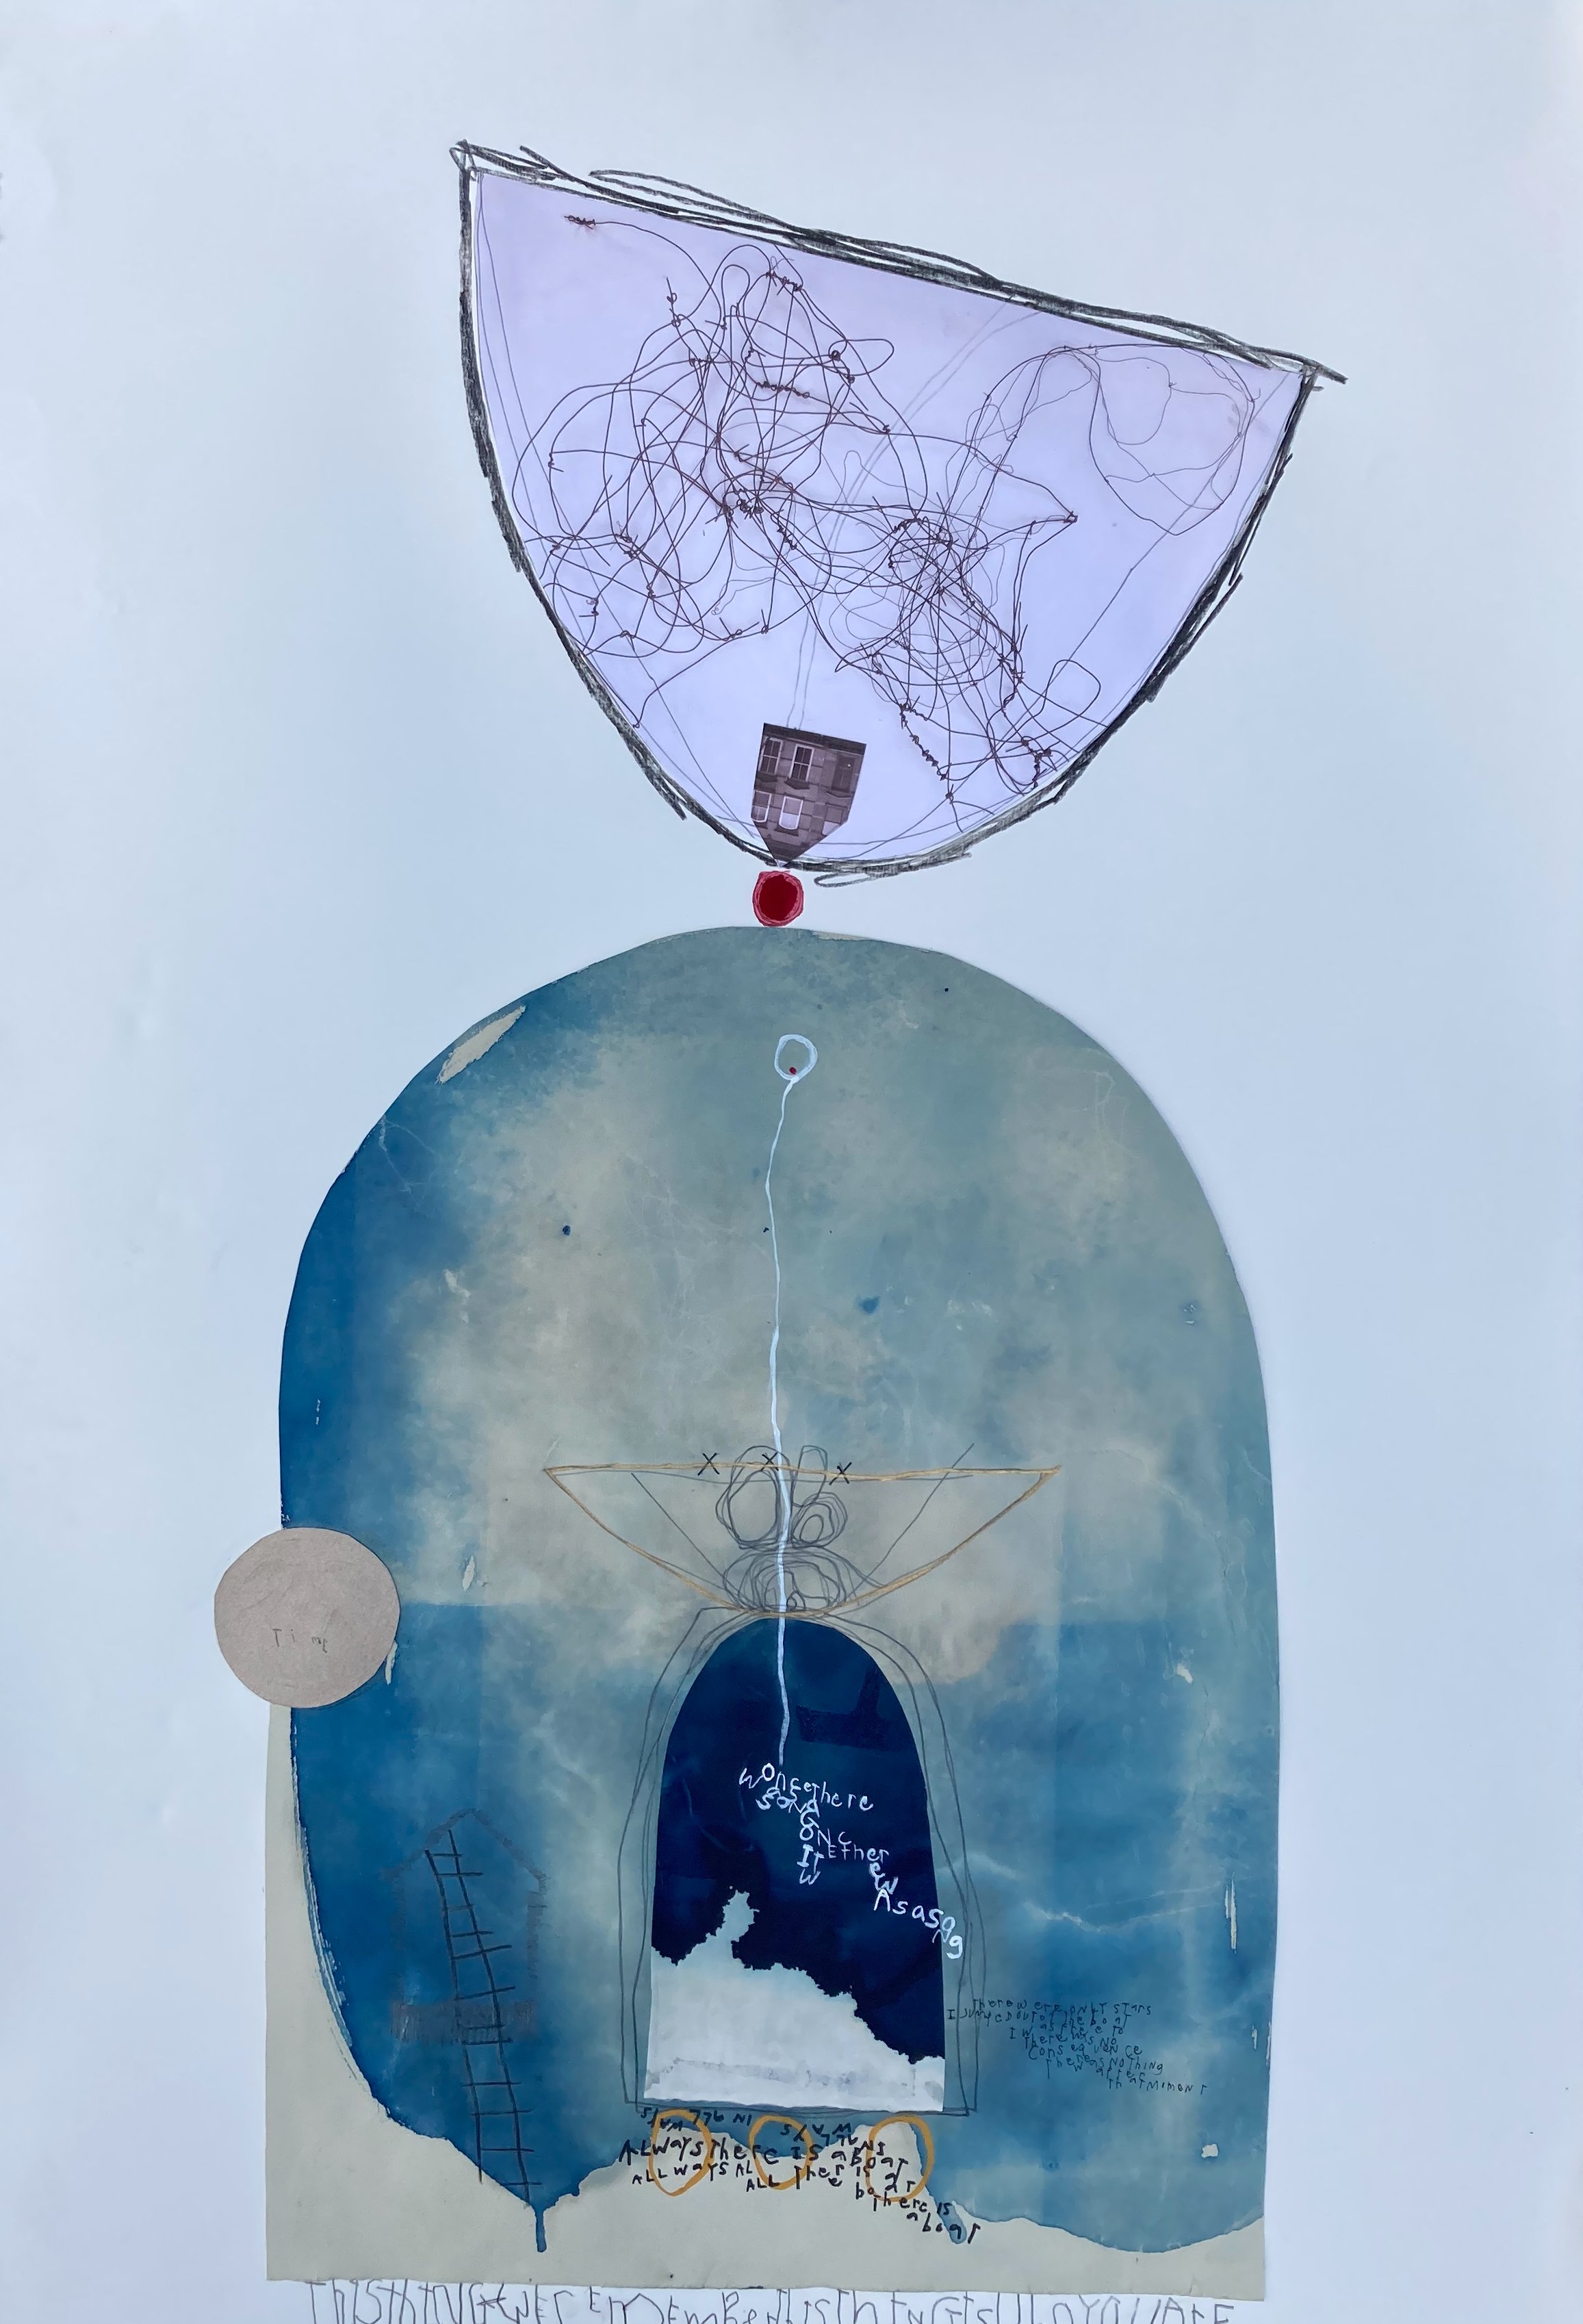 FOLLOW THE LIGHTNING, 2023. Cyanotype print, photo collage, gouache, ink, graphite on paper, 44 x 30”.